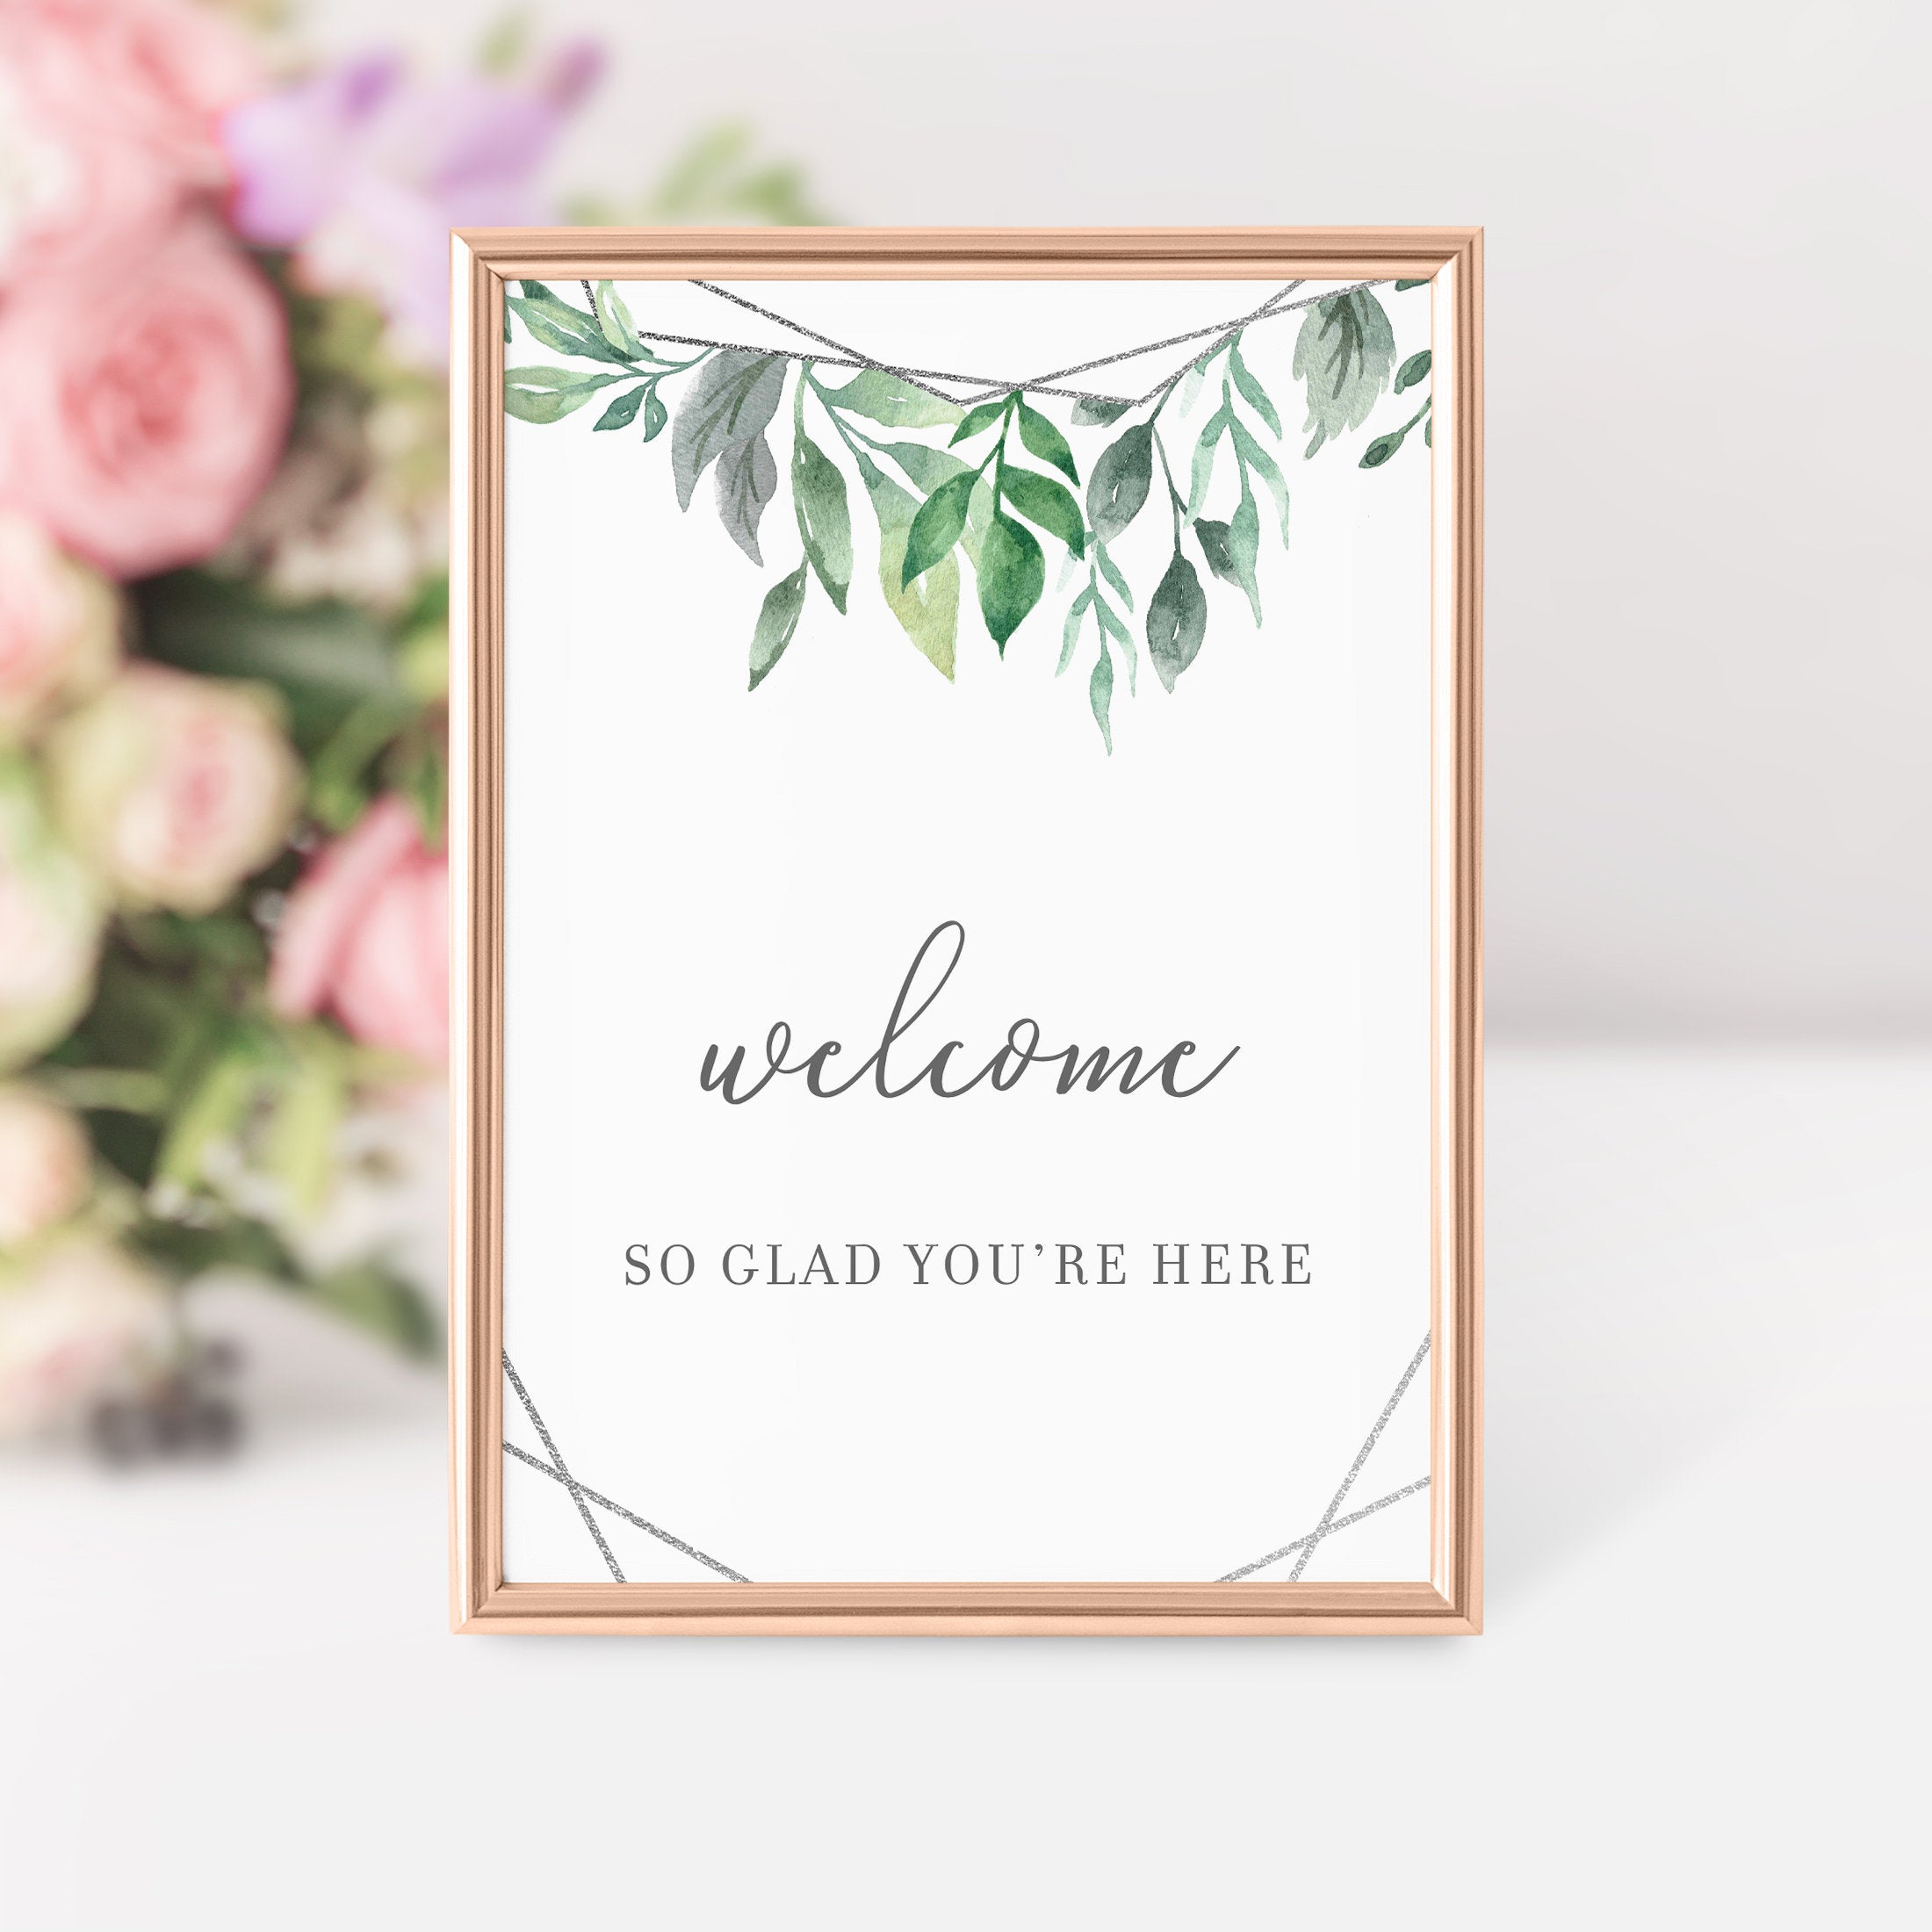 Geometric Silver Greenery Printable Welcome Sign INSTANT DOWNLOAD, Bridal Shower, Baby Shower, Wedding Decorations and Supplies - GFS100 - @PlumPolkaDot 